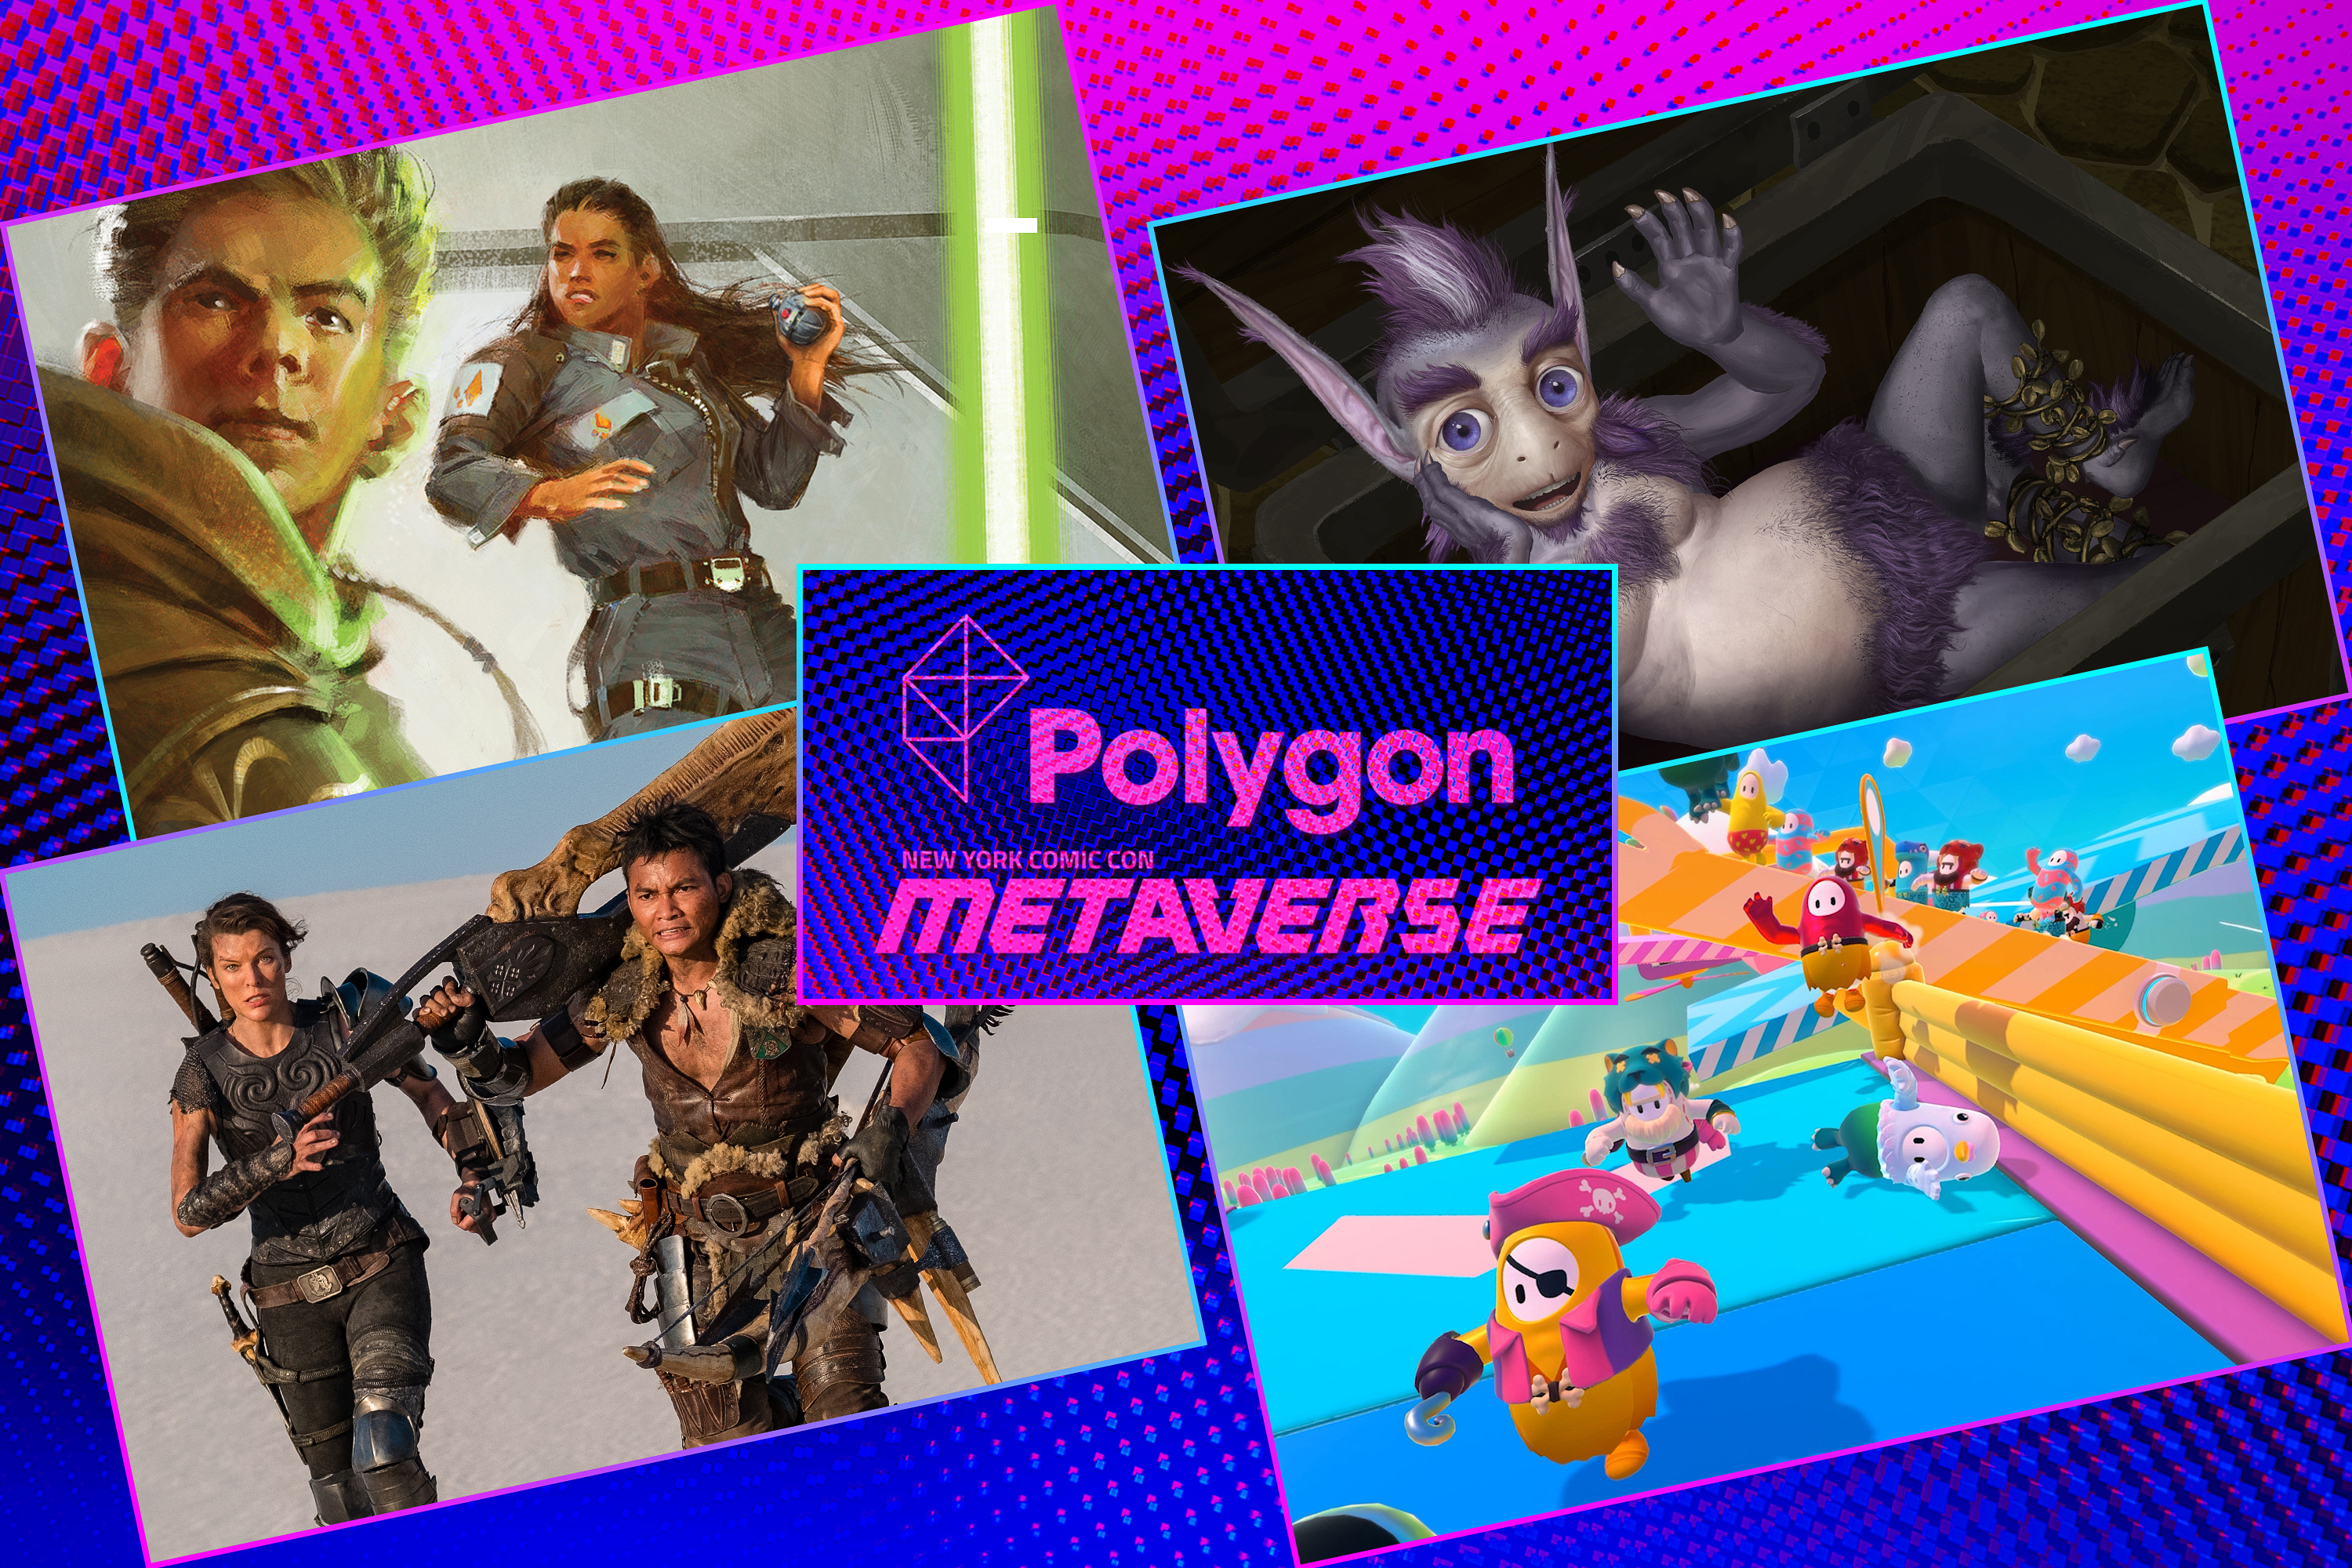 Graphic grid of four rectangles on bright purple blue background with various screen images and a Polygon/Metaverse logo